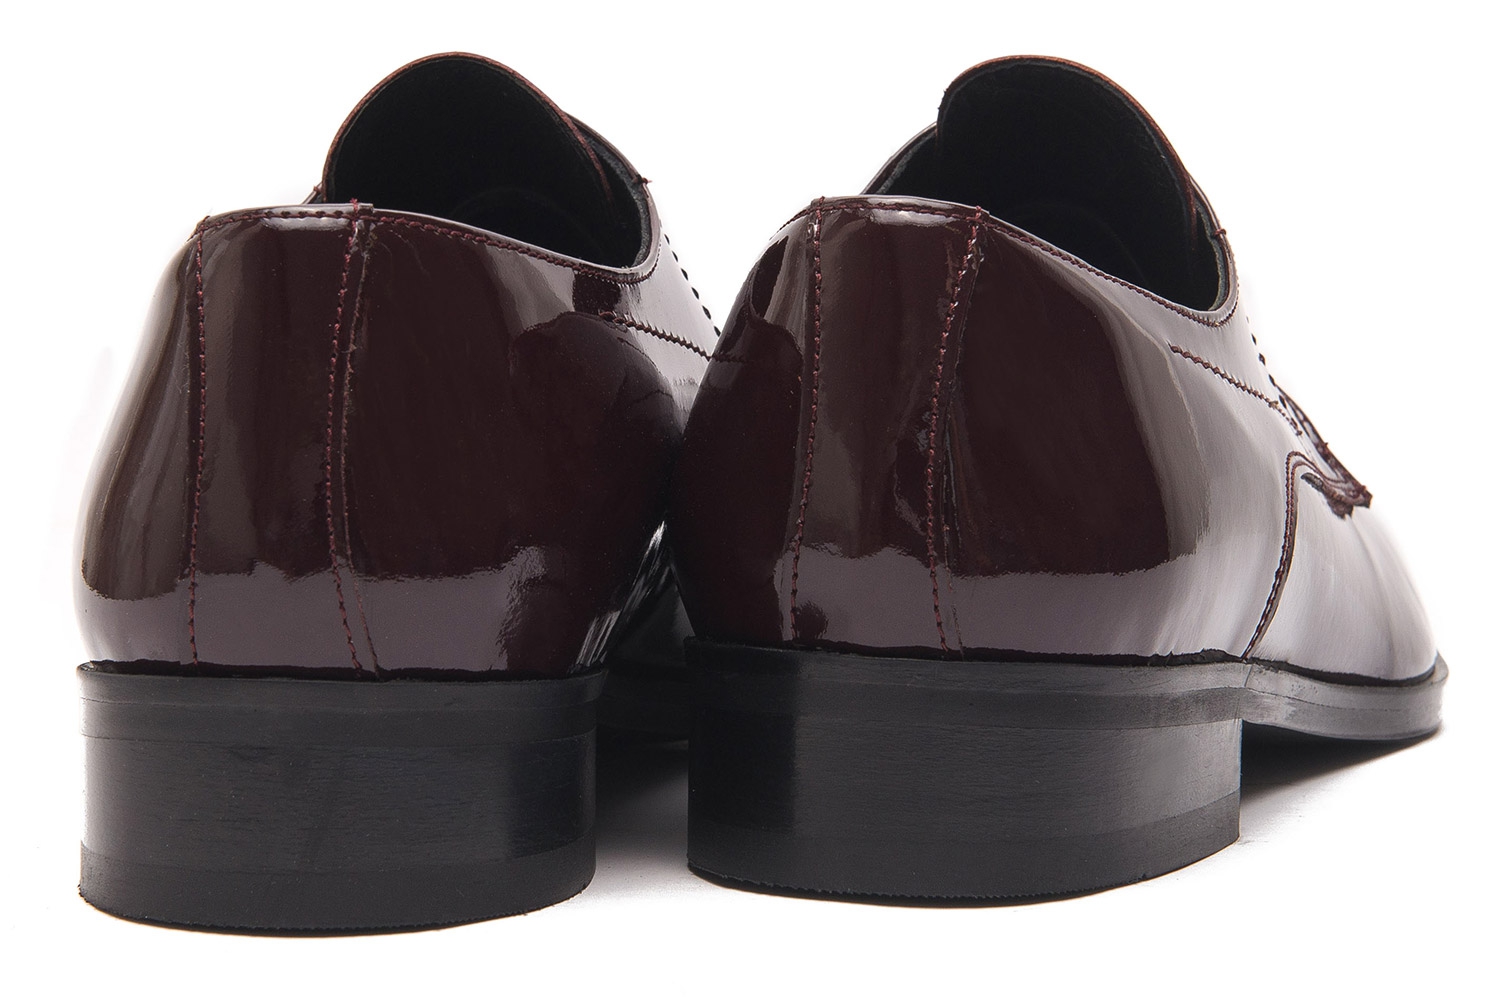 Burgundy genuine leather shoes 2